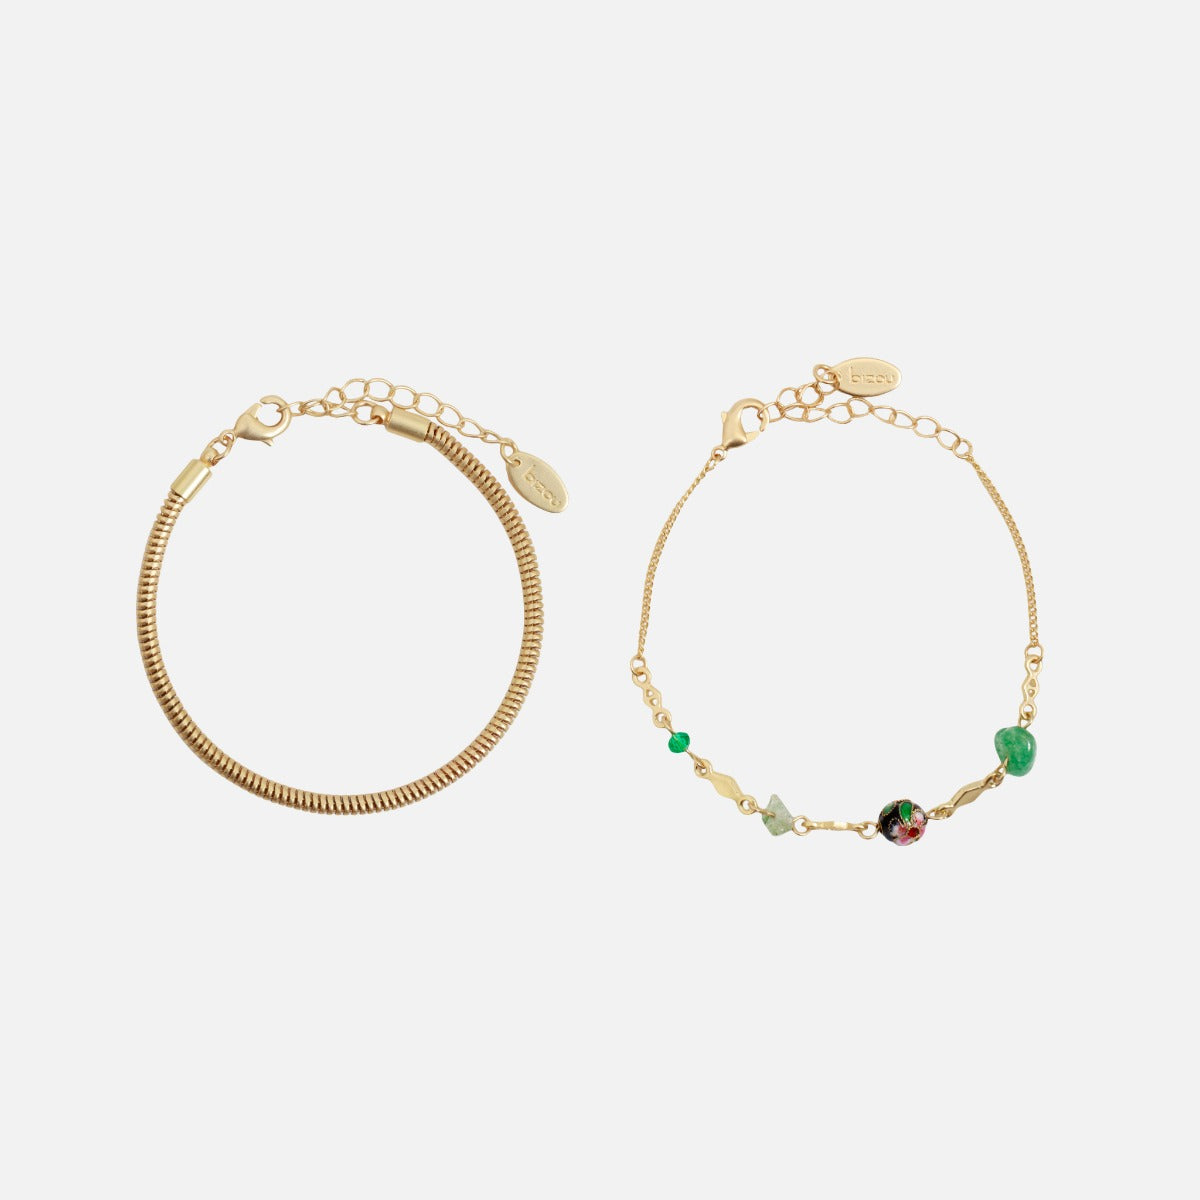 Set of two golden bracelets with green beads